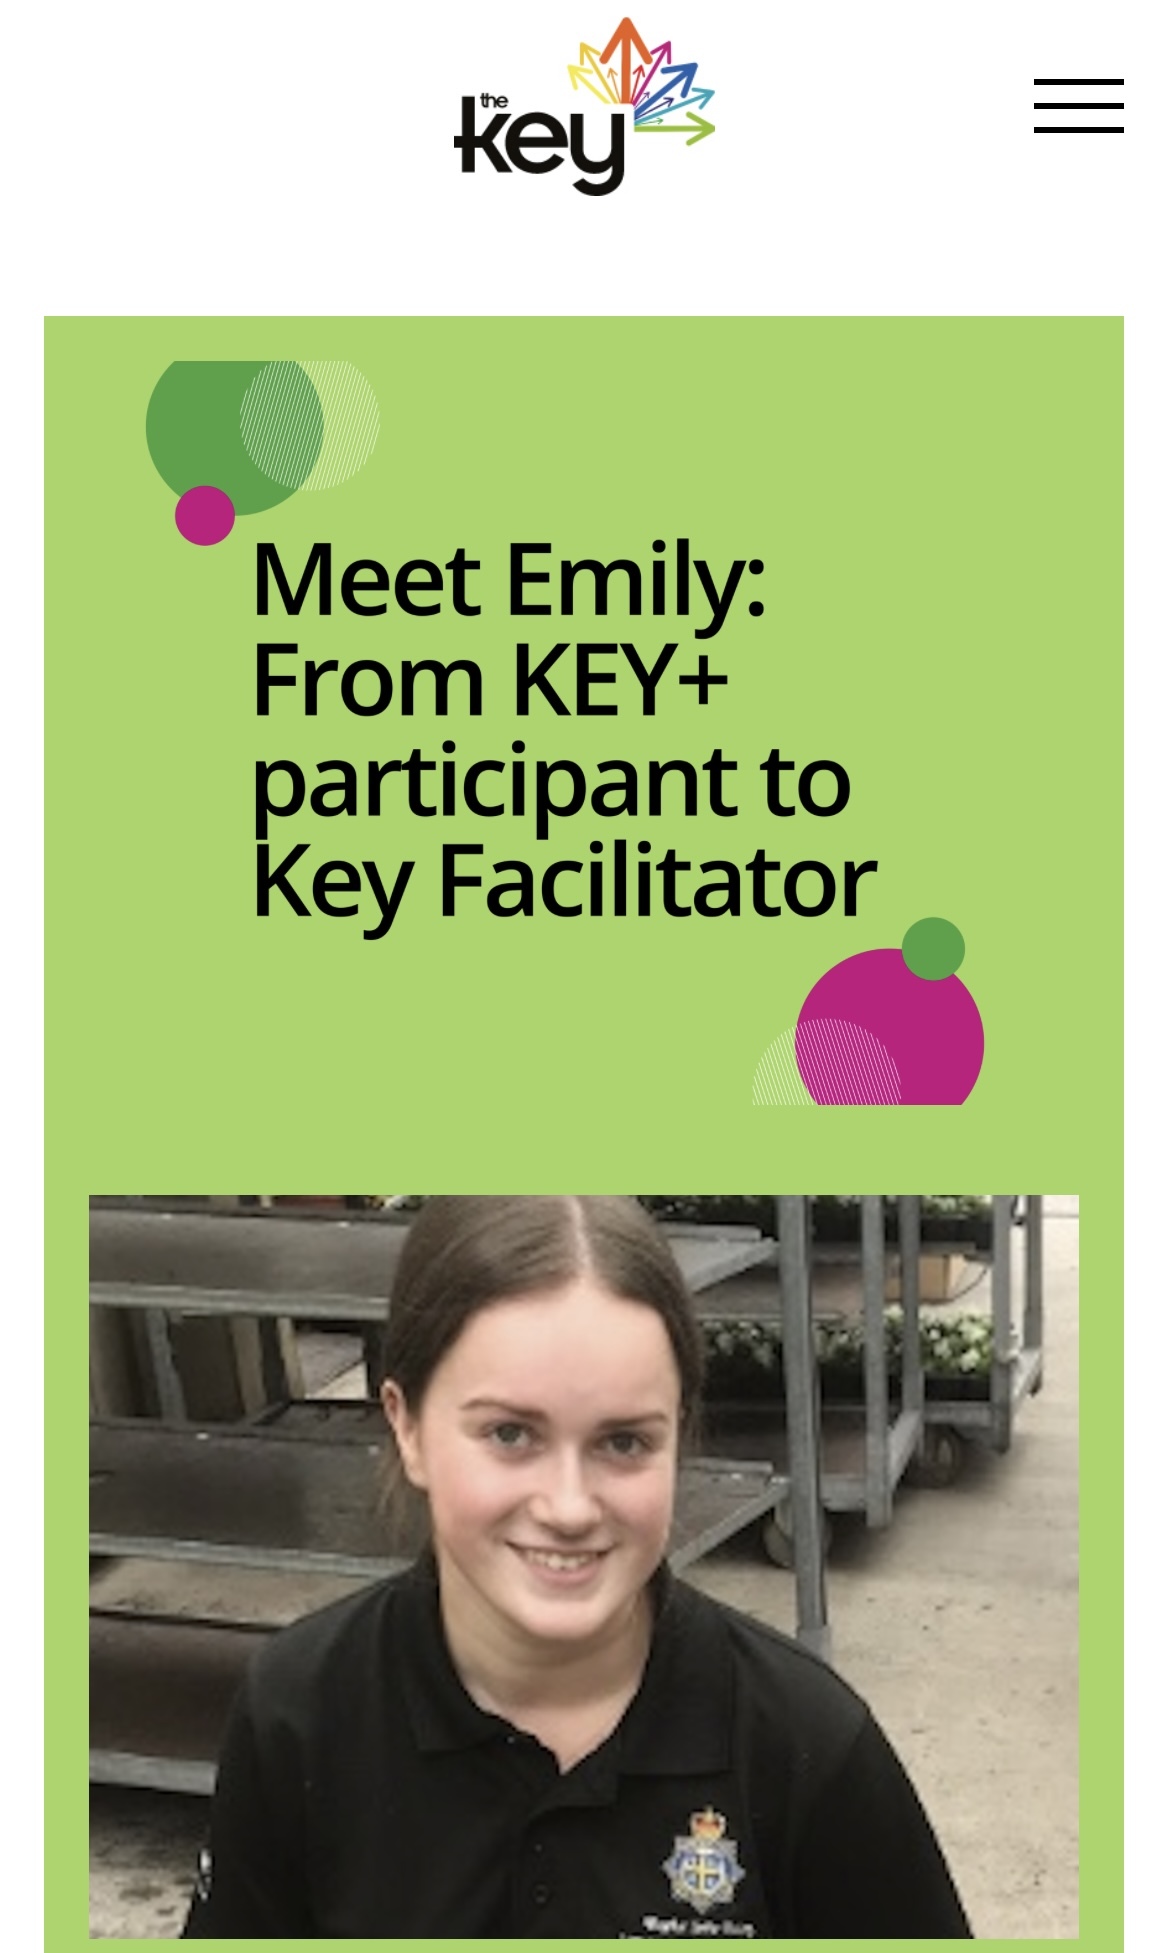 Our very own KEY+ Facilitator